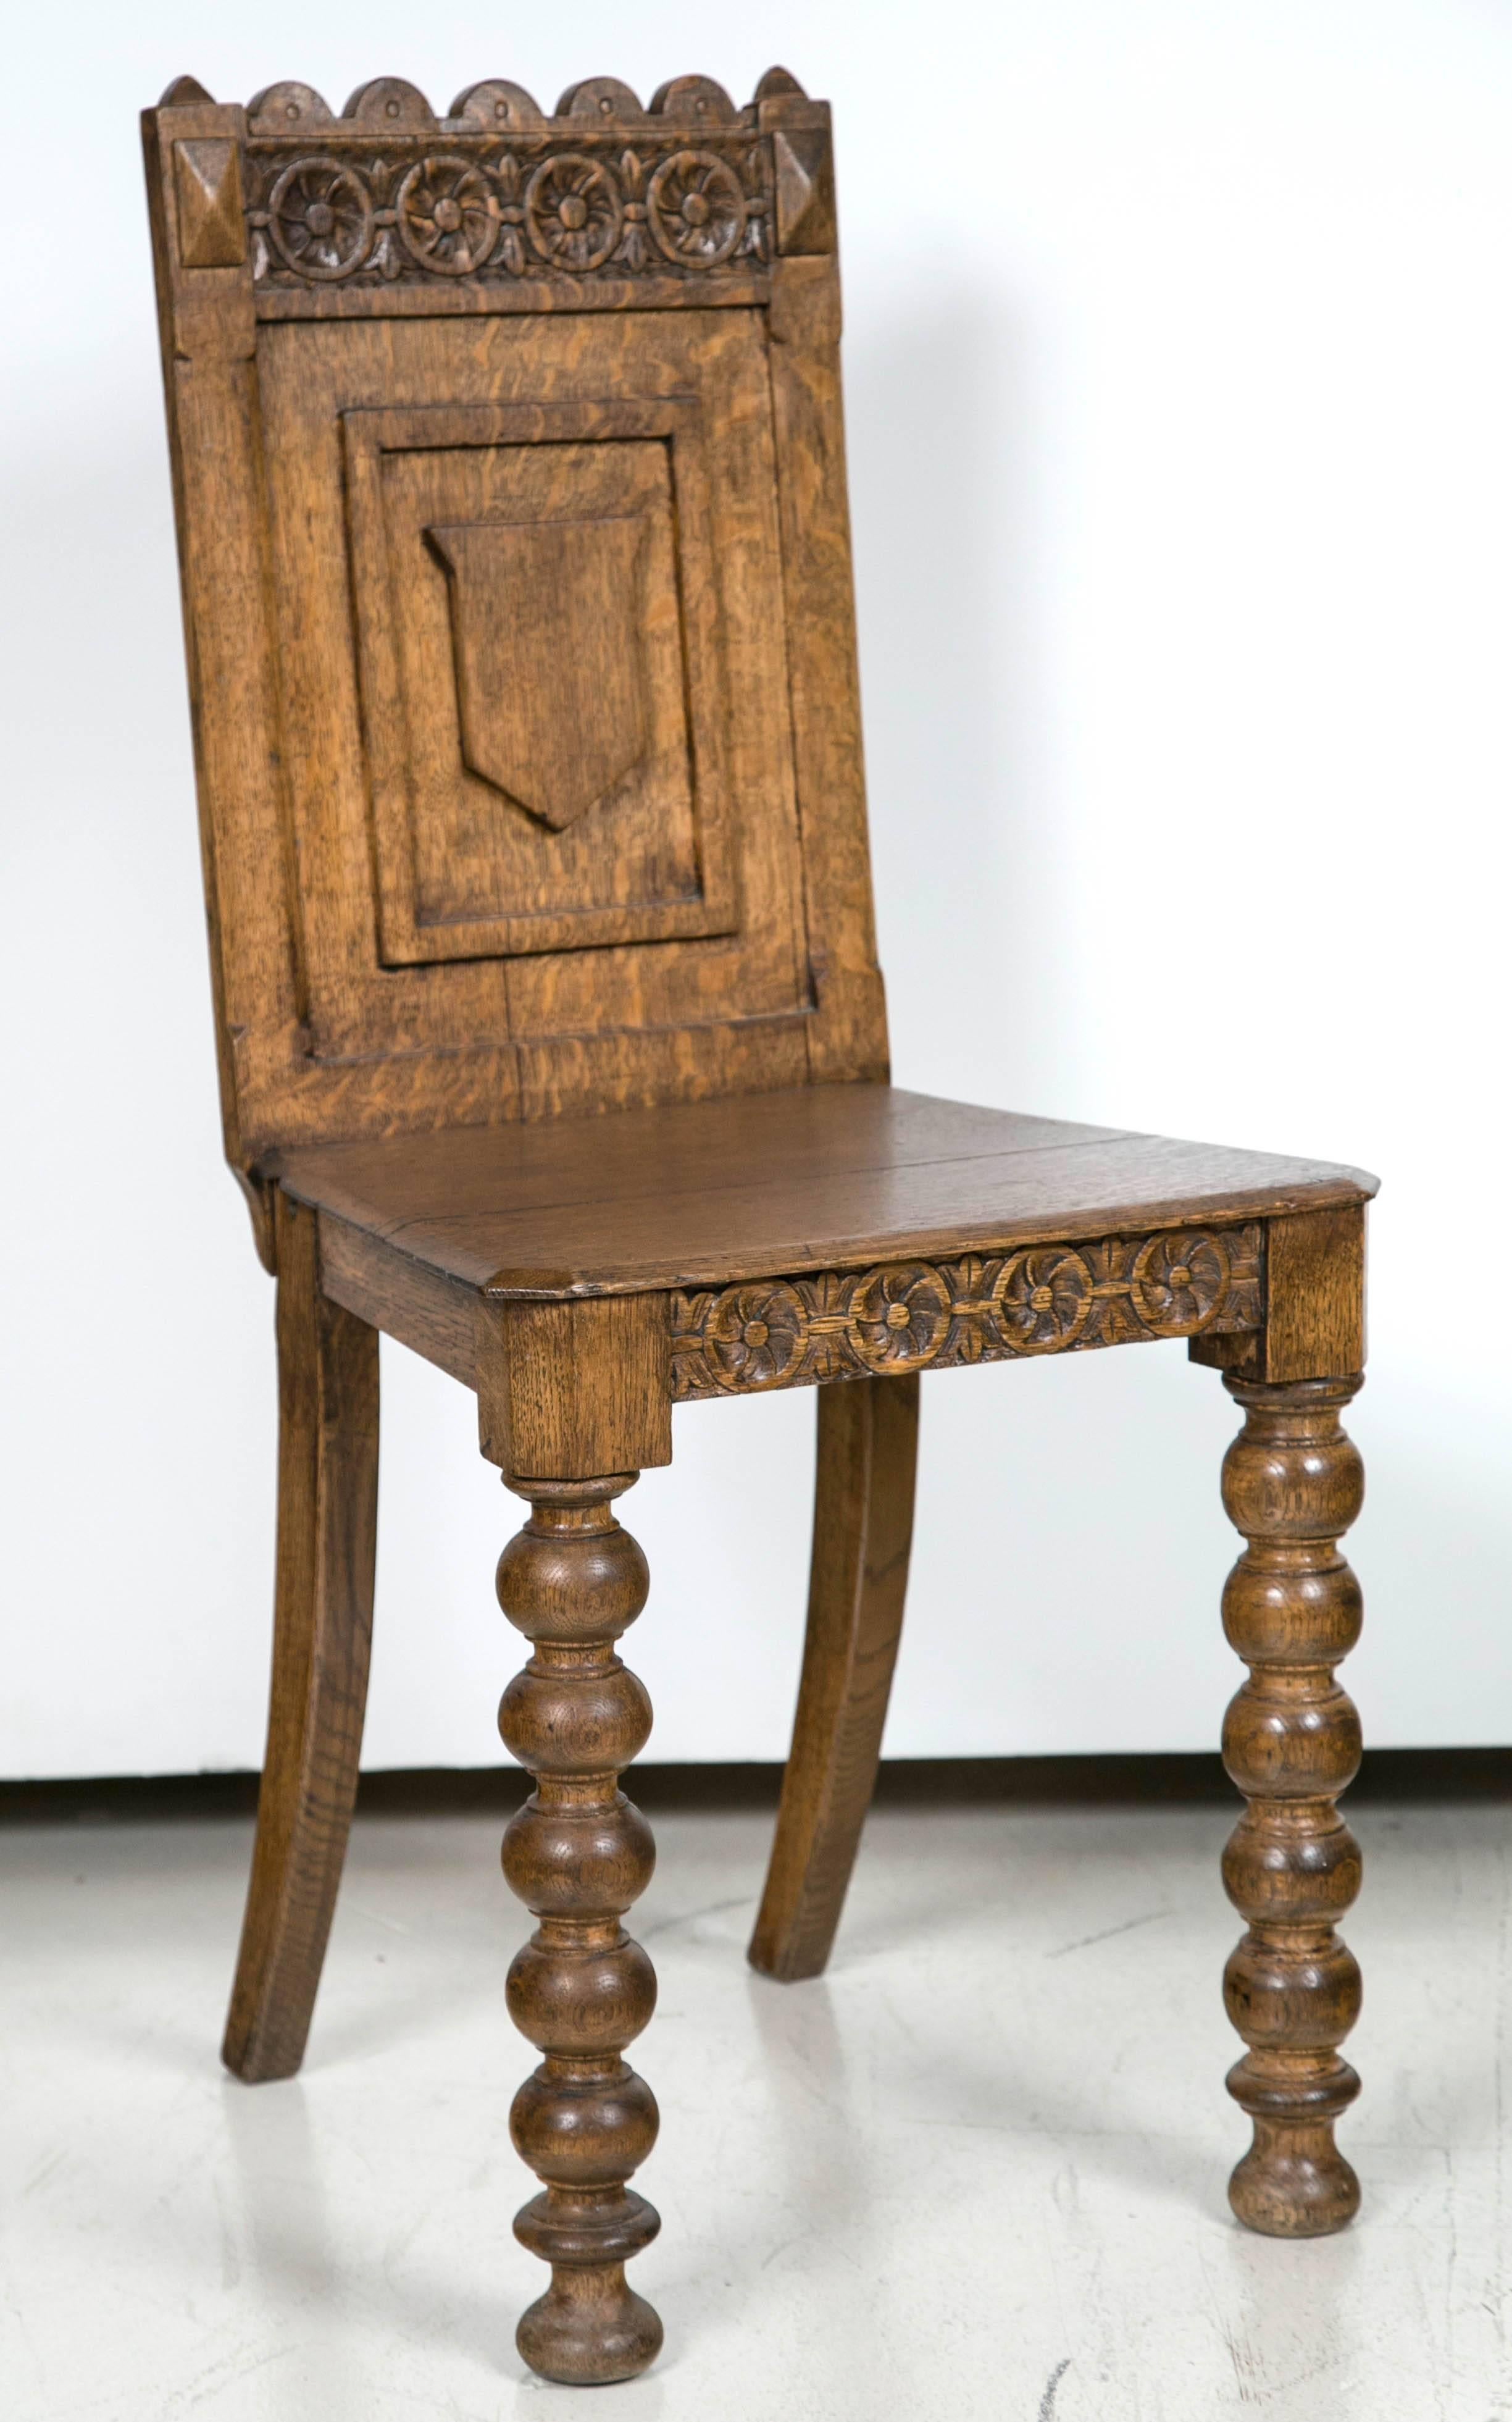 Antique, Germanic hall chair has decorative carvings on back and on the apron. Carvings include a shield and additional details. One split in the wood seat but in good condition.